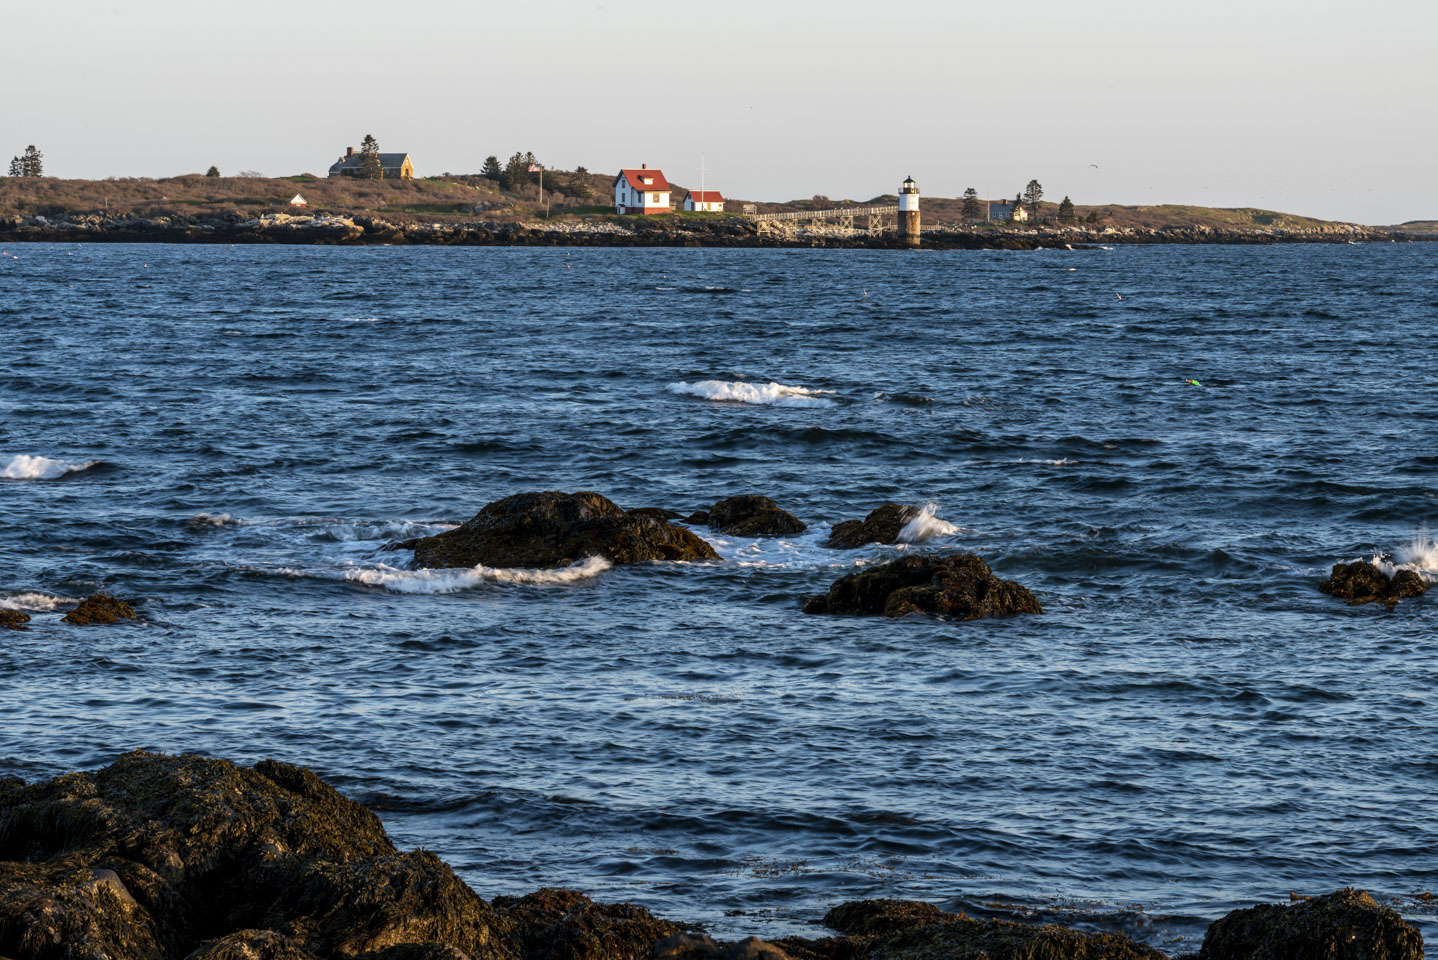 A view of Ram Island Lighthouse at sunset